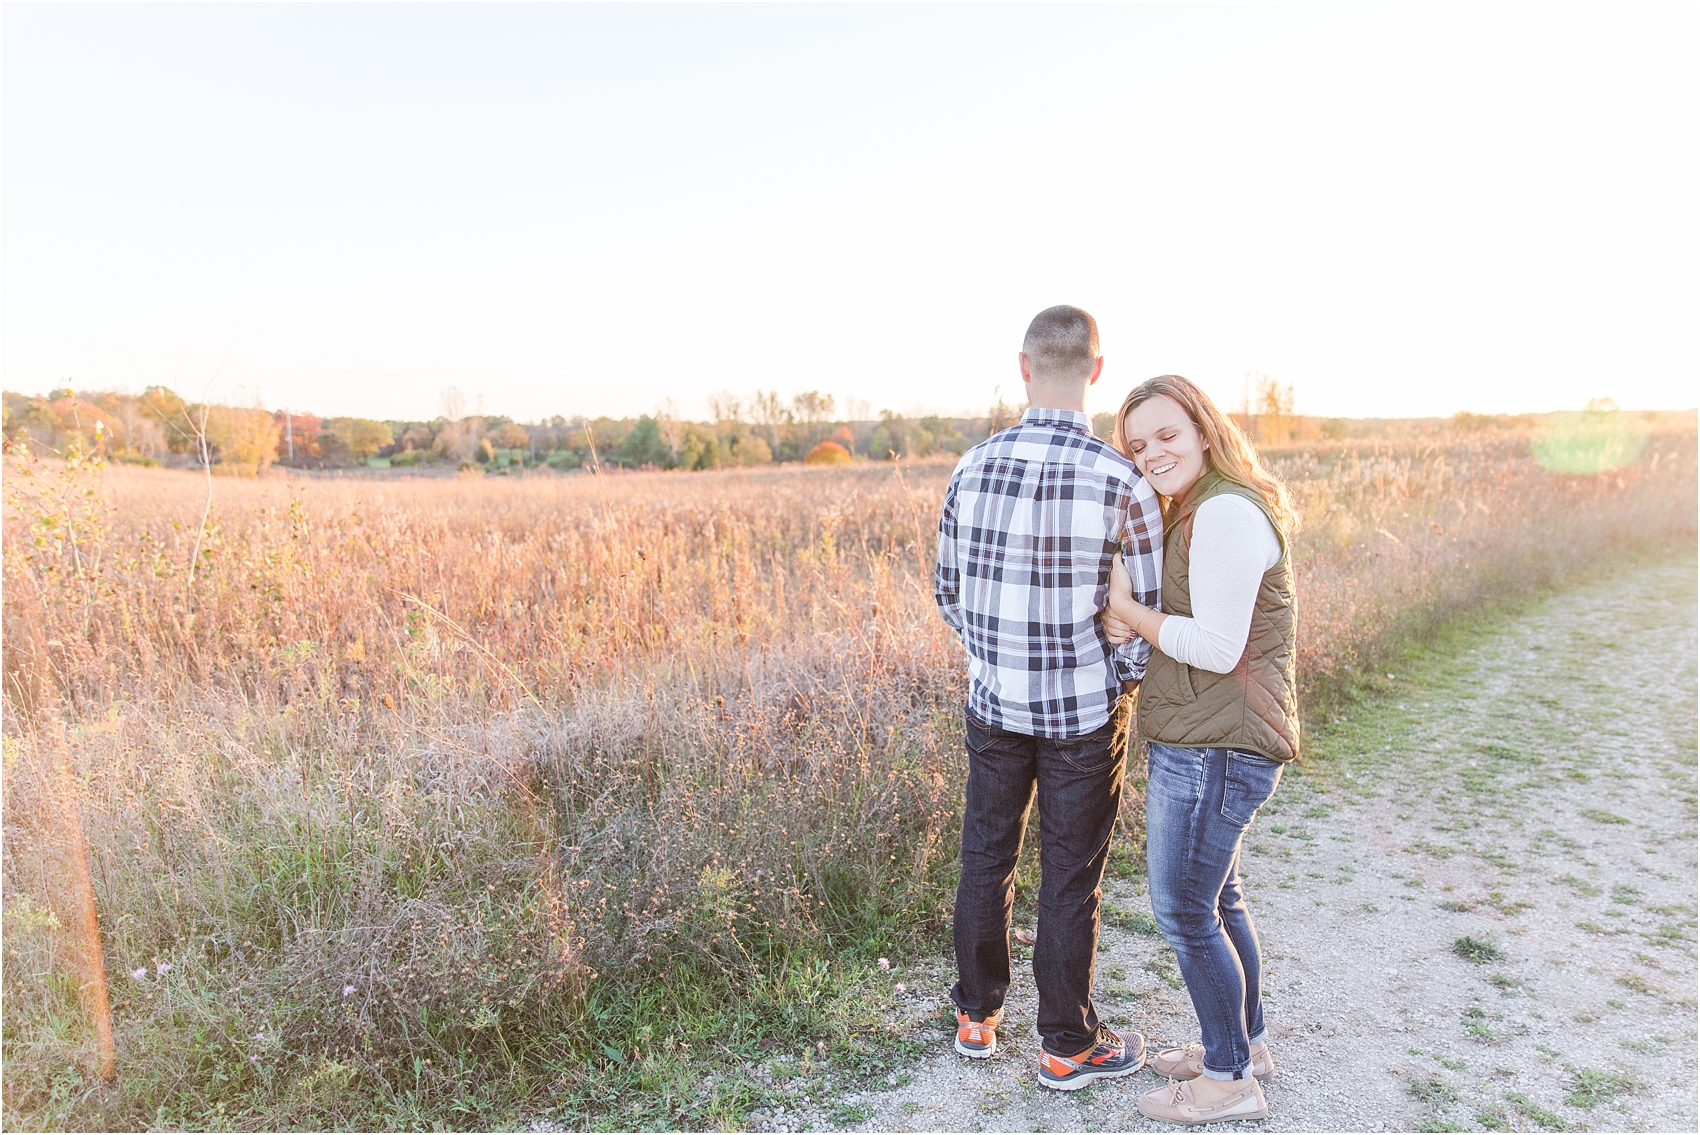 romantic-fall-engagement-photos-at-indian-springs-metropark-in-clarkston-mi-by-courtney-carolyn-photography_0023.jpg